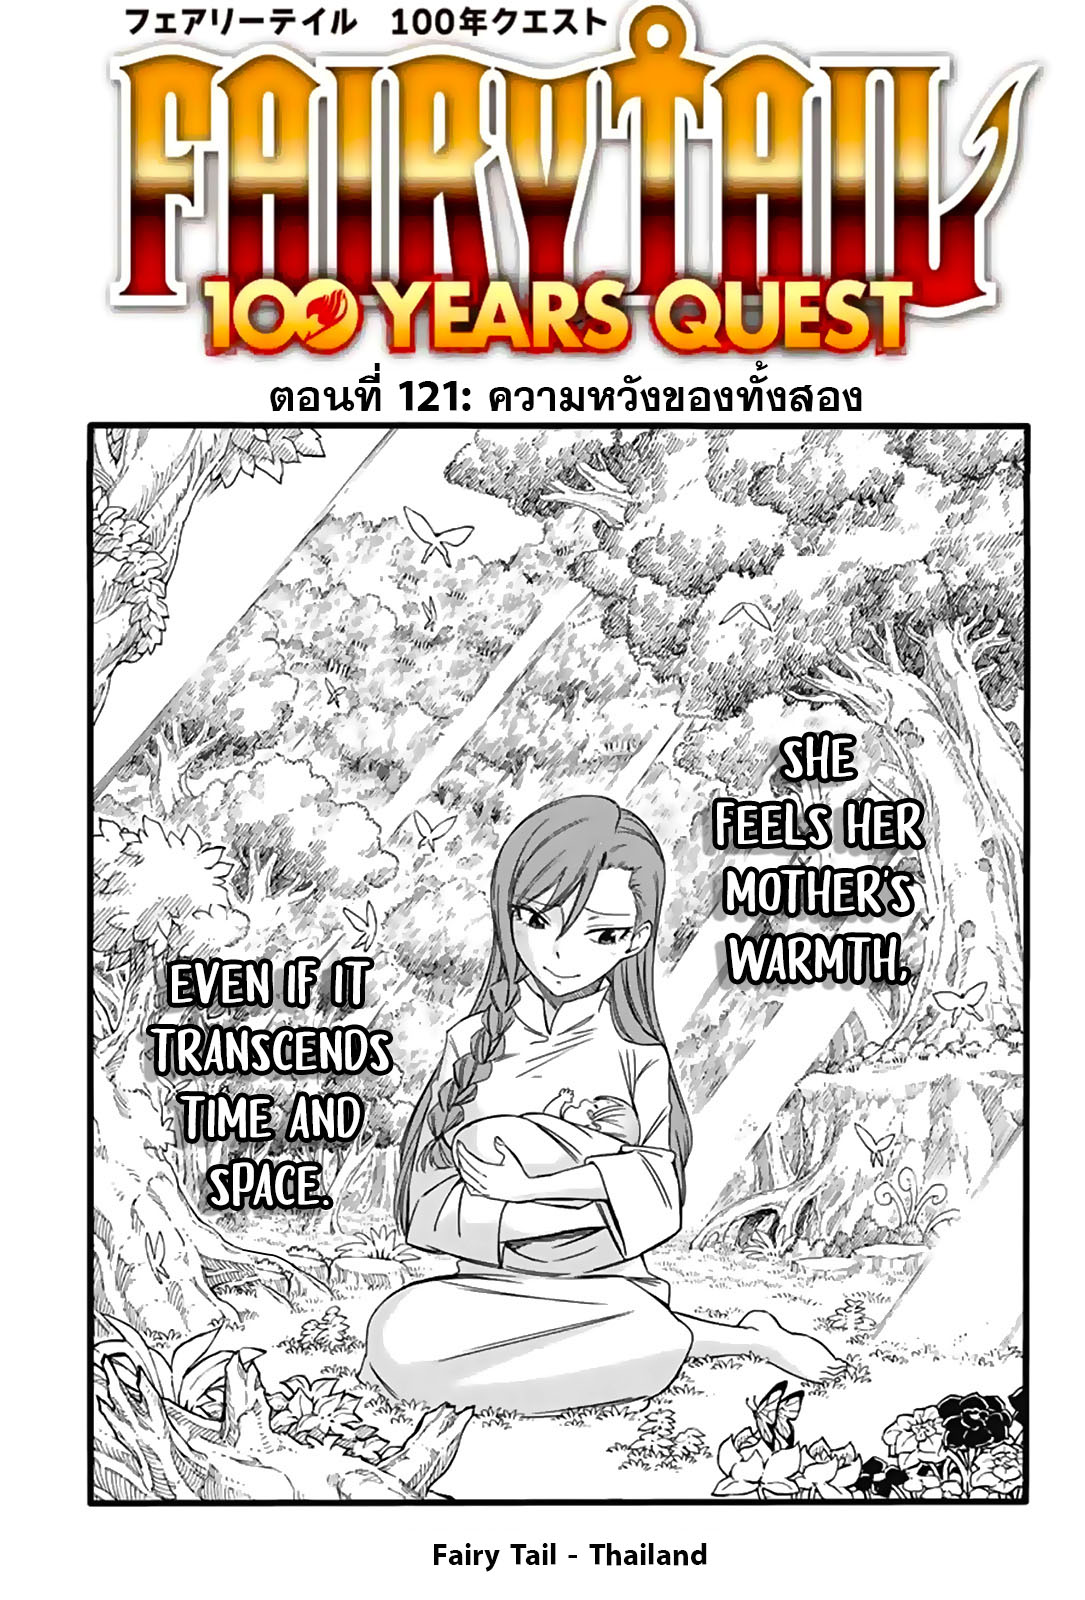 Fairy Tail 100 Years Quest 121 (1)